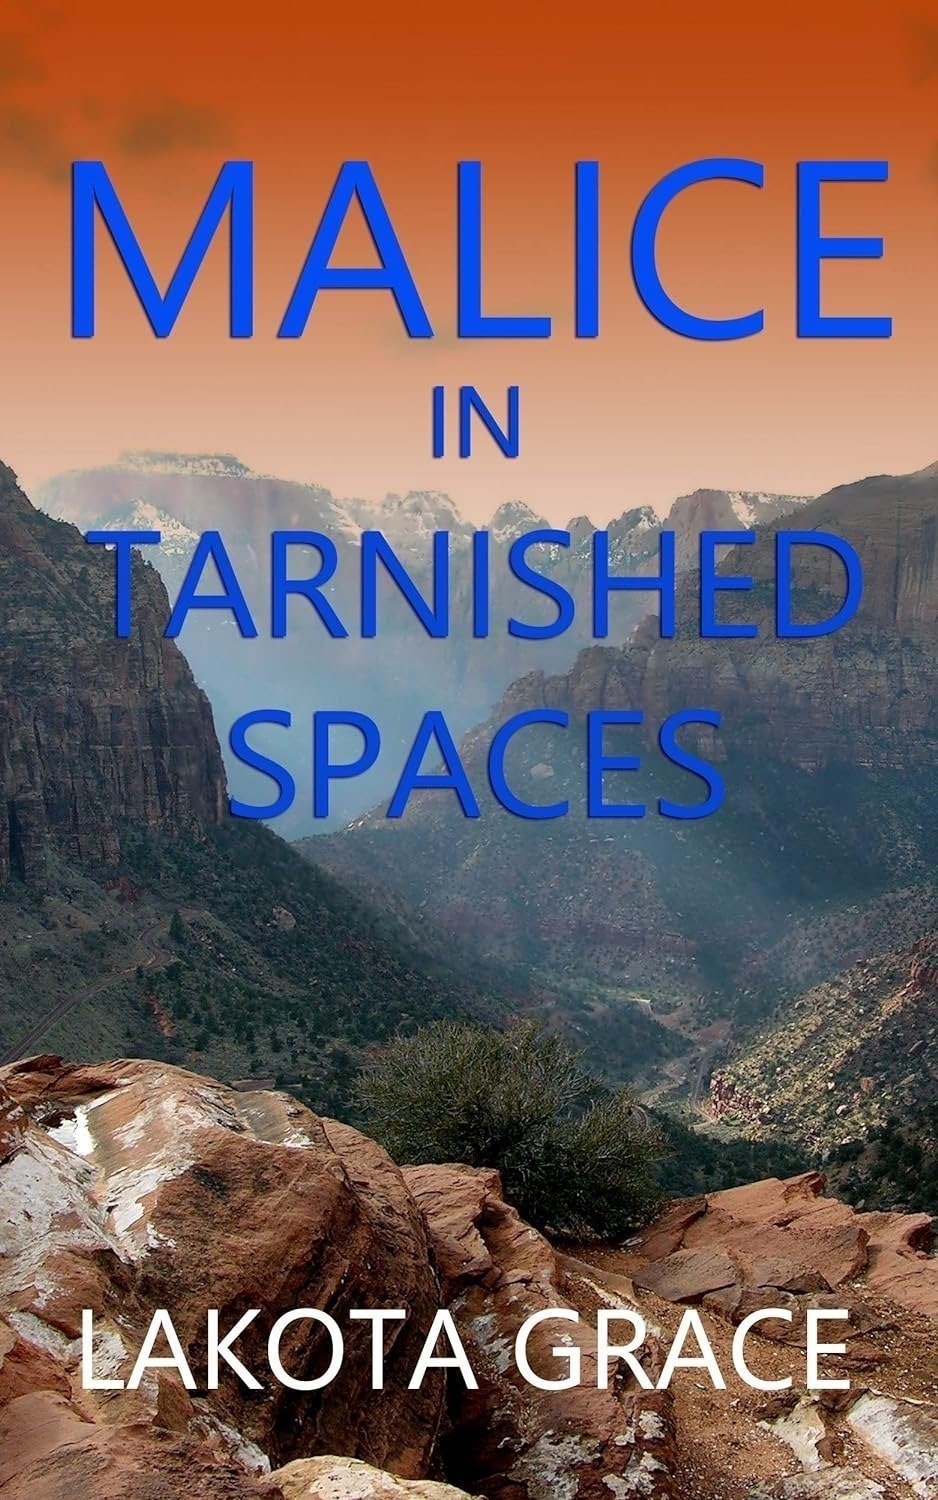 Book cover: Malice in Tarnished Spaces.